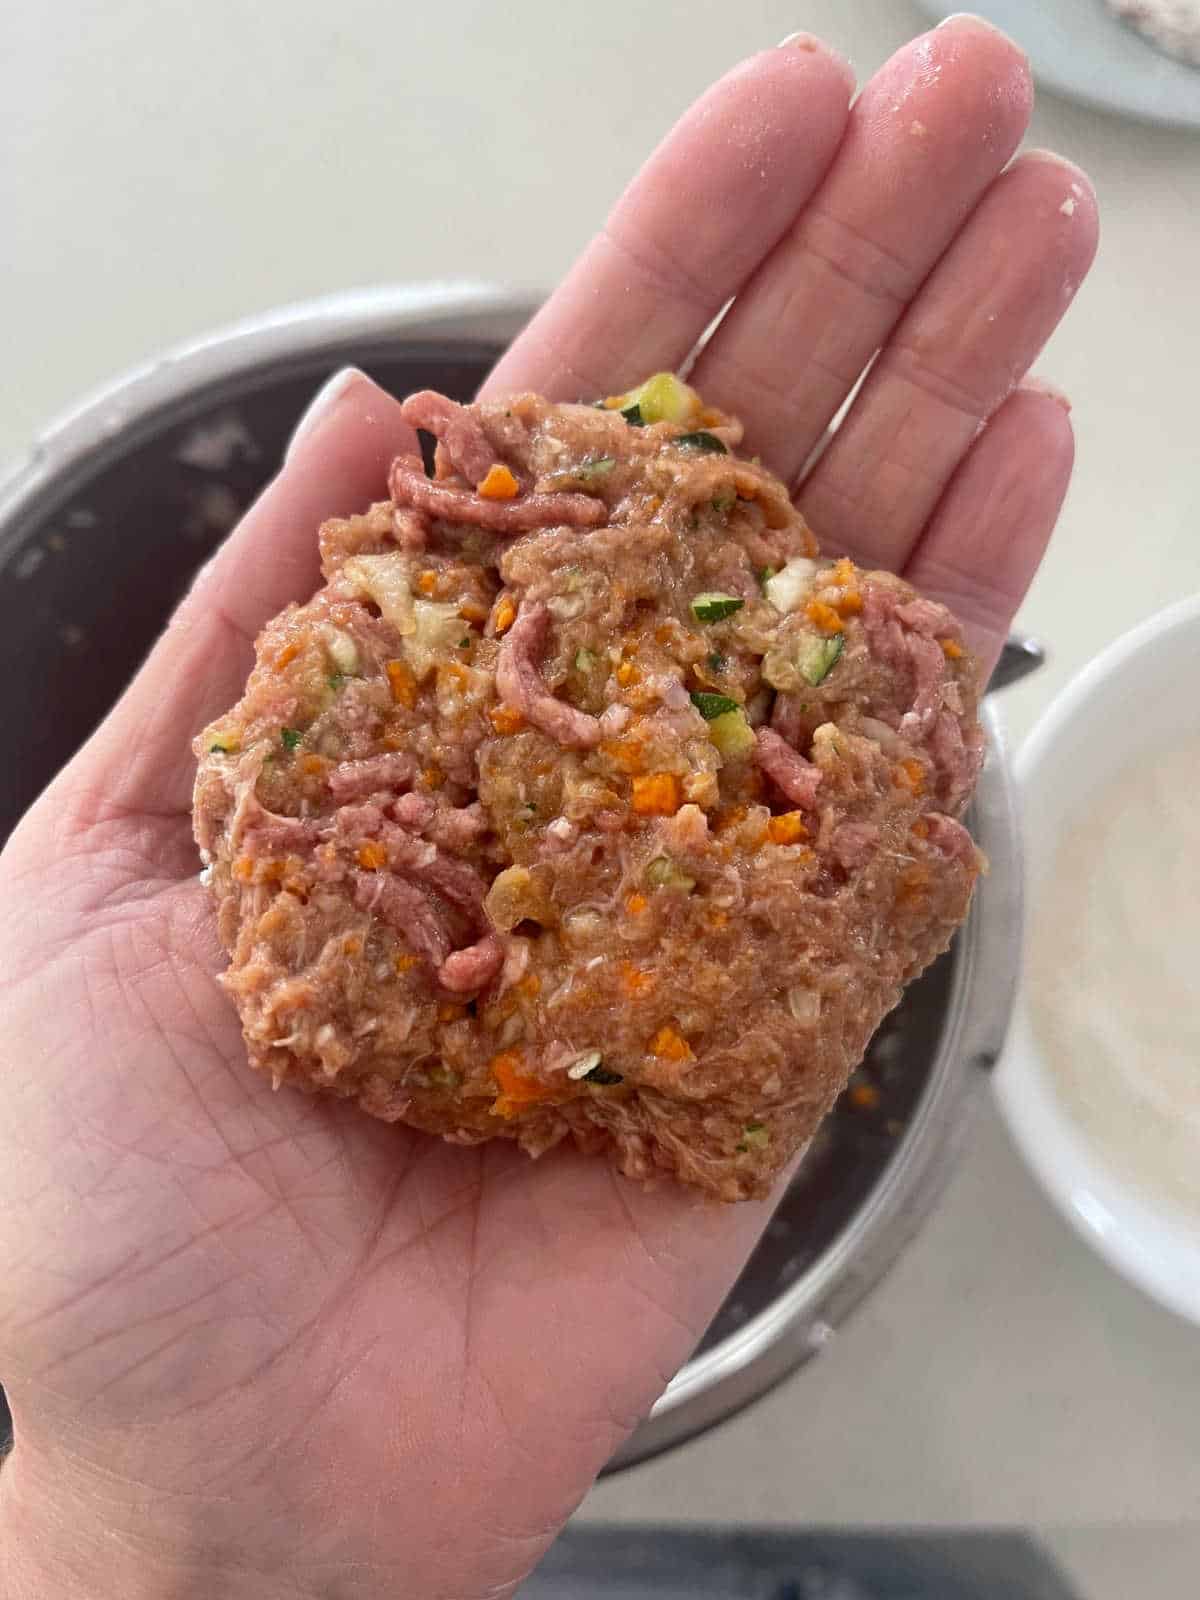 adult hand holding a rissole patty.